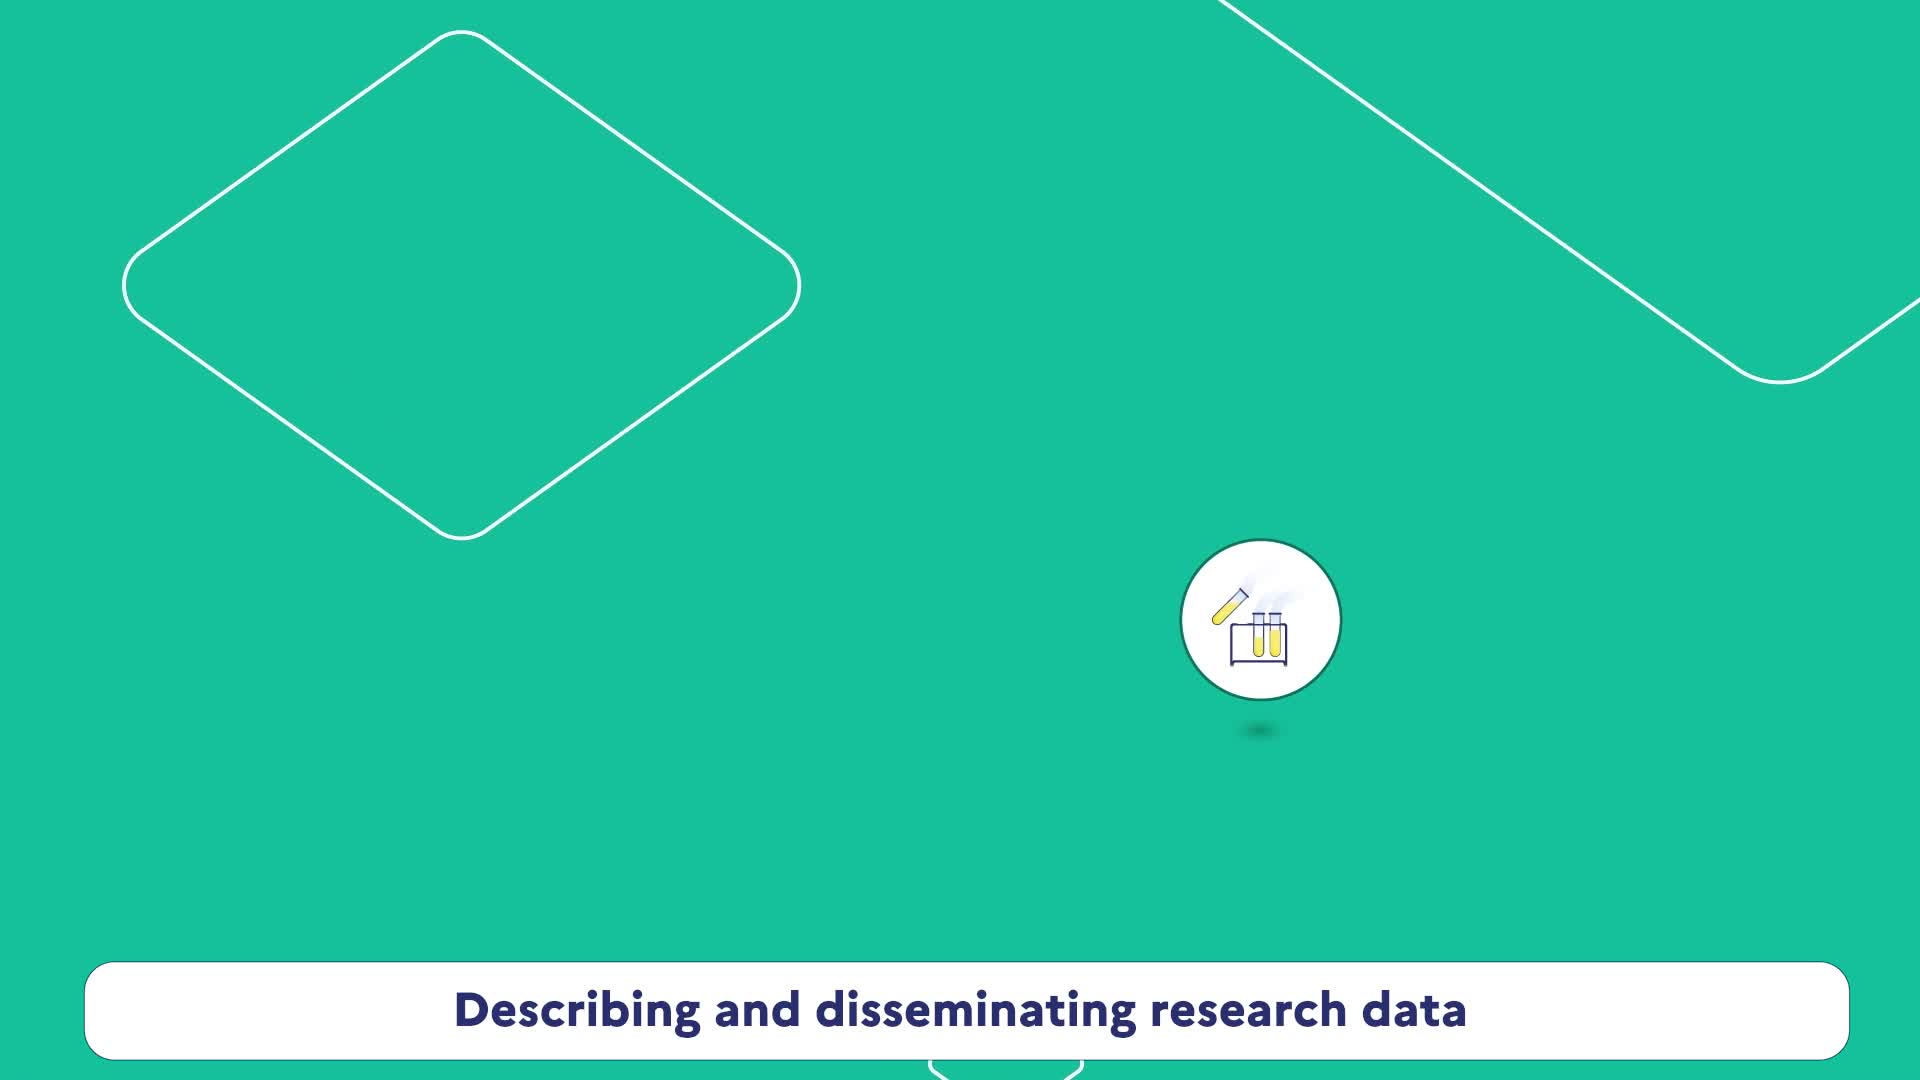 Recherche Data Gouv, an ecosystem for sharing and opening up research data.